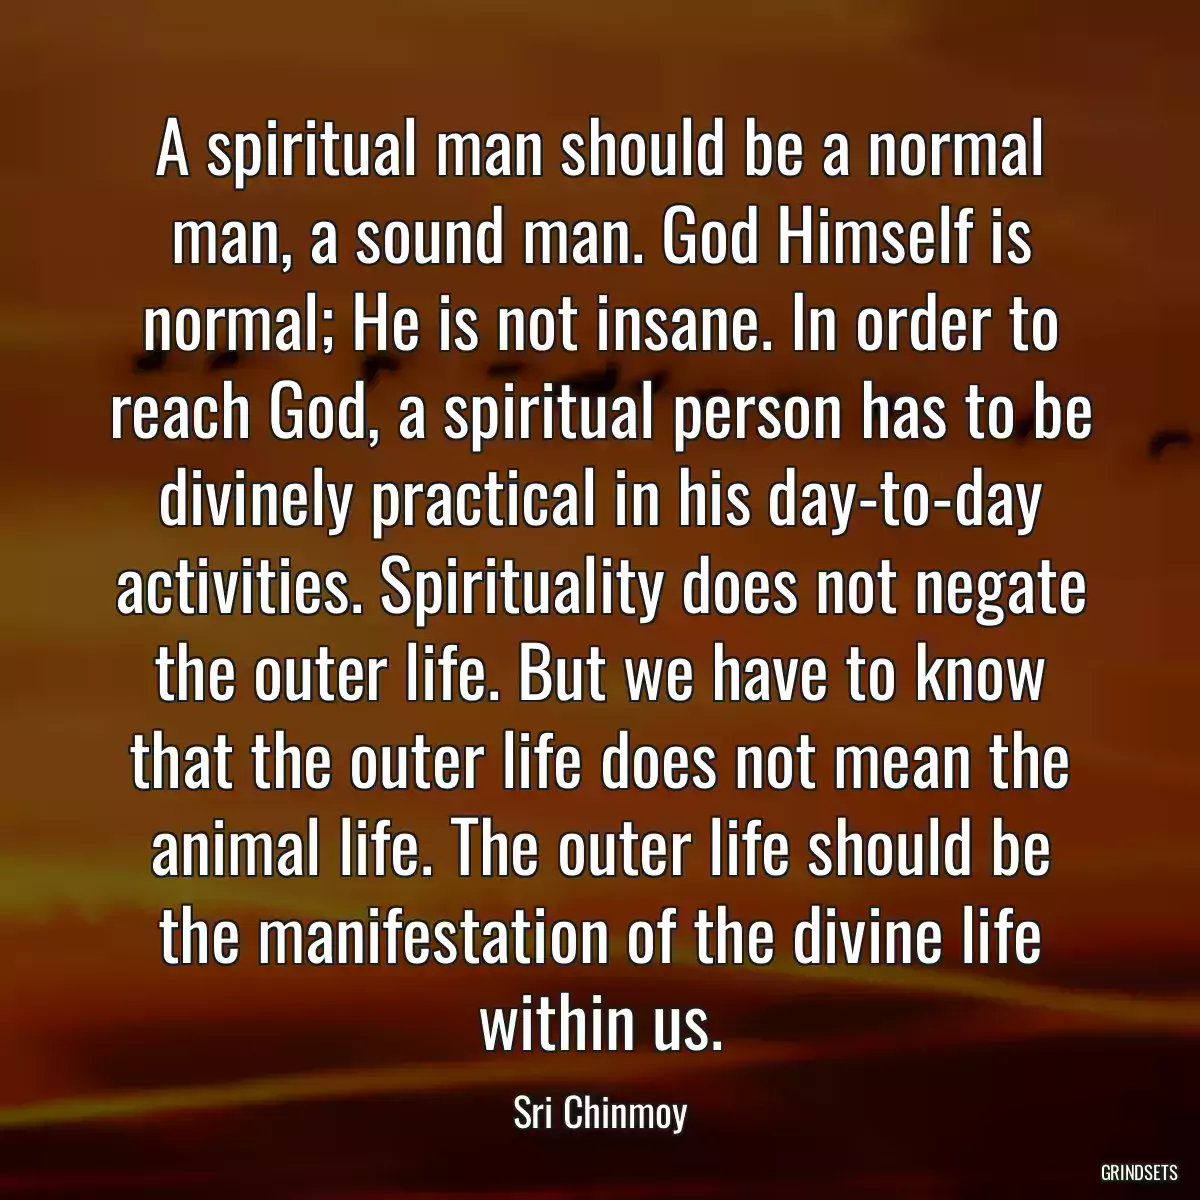 A spiritual man should be a normal man, a sound man. God Himself is normal; He is not insane. In order to reach God, a spiritual person has to be divinely practical in his day-to-day activities. Spirituality does not negate the outer life. But we have to know that the outer life does not mean the animal life. The outer life should be the manifestation of the divine life within us.